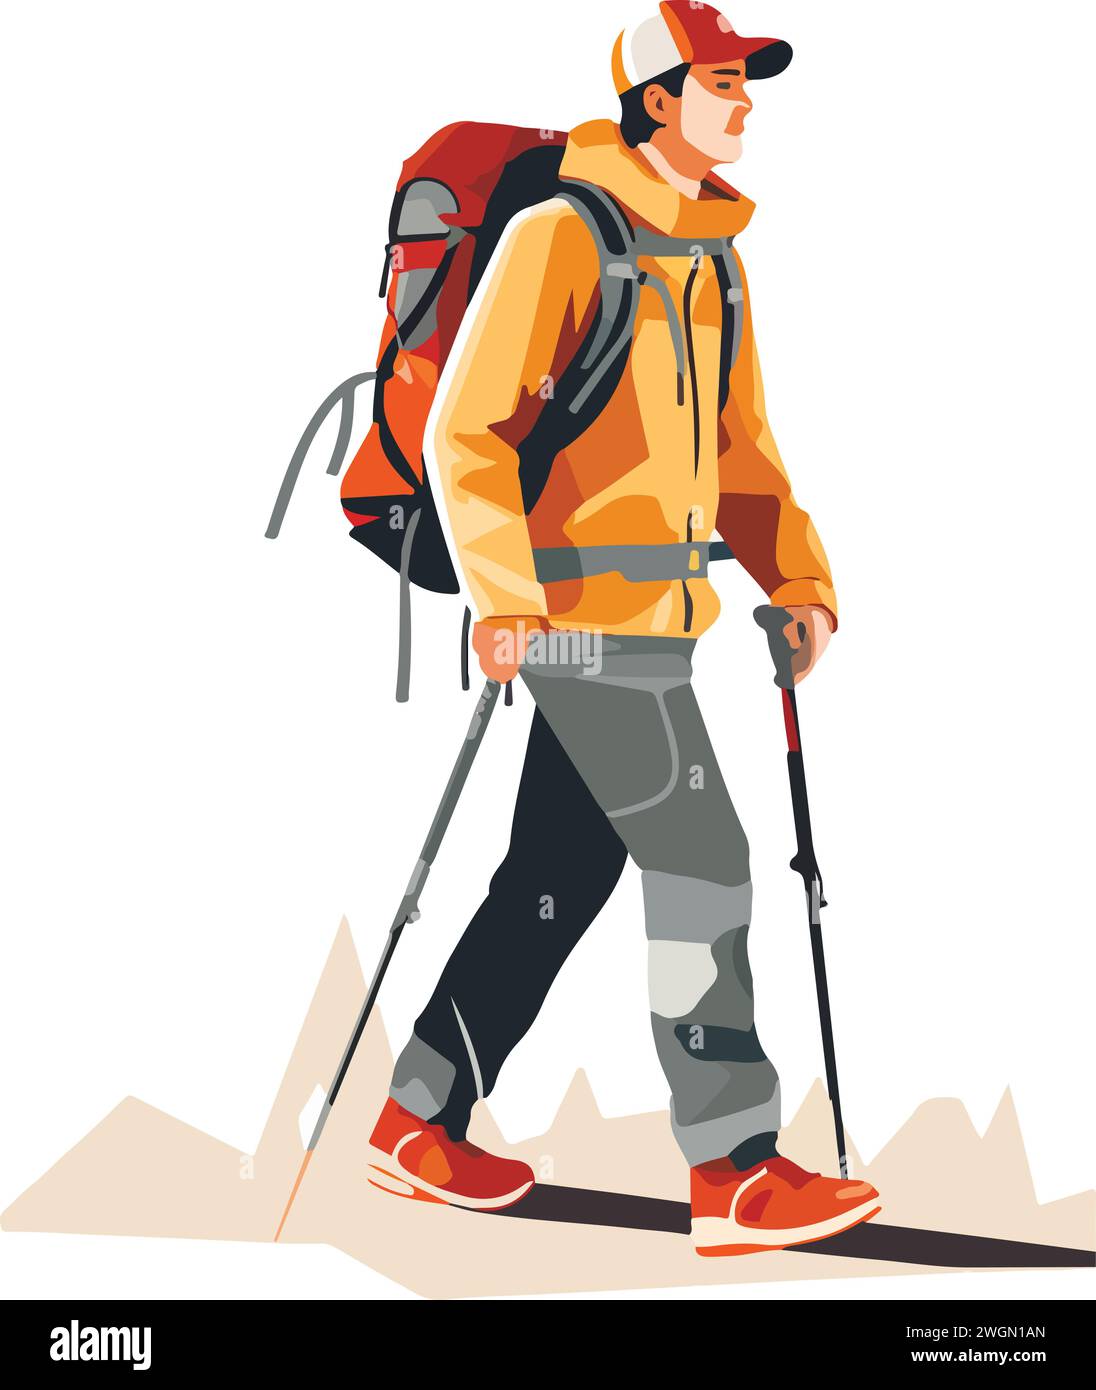 Hiker person hiking or trekking with backpack walking in mountain forest outdoor wilderness landscape, vector illustration in flat style Stock Vector